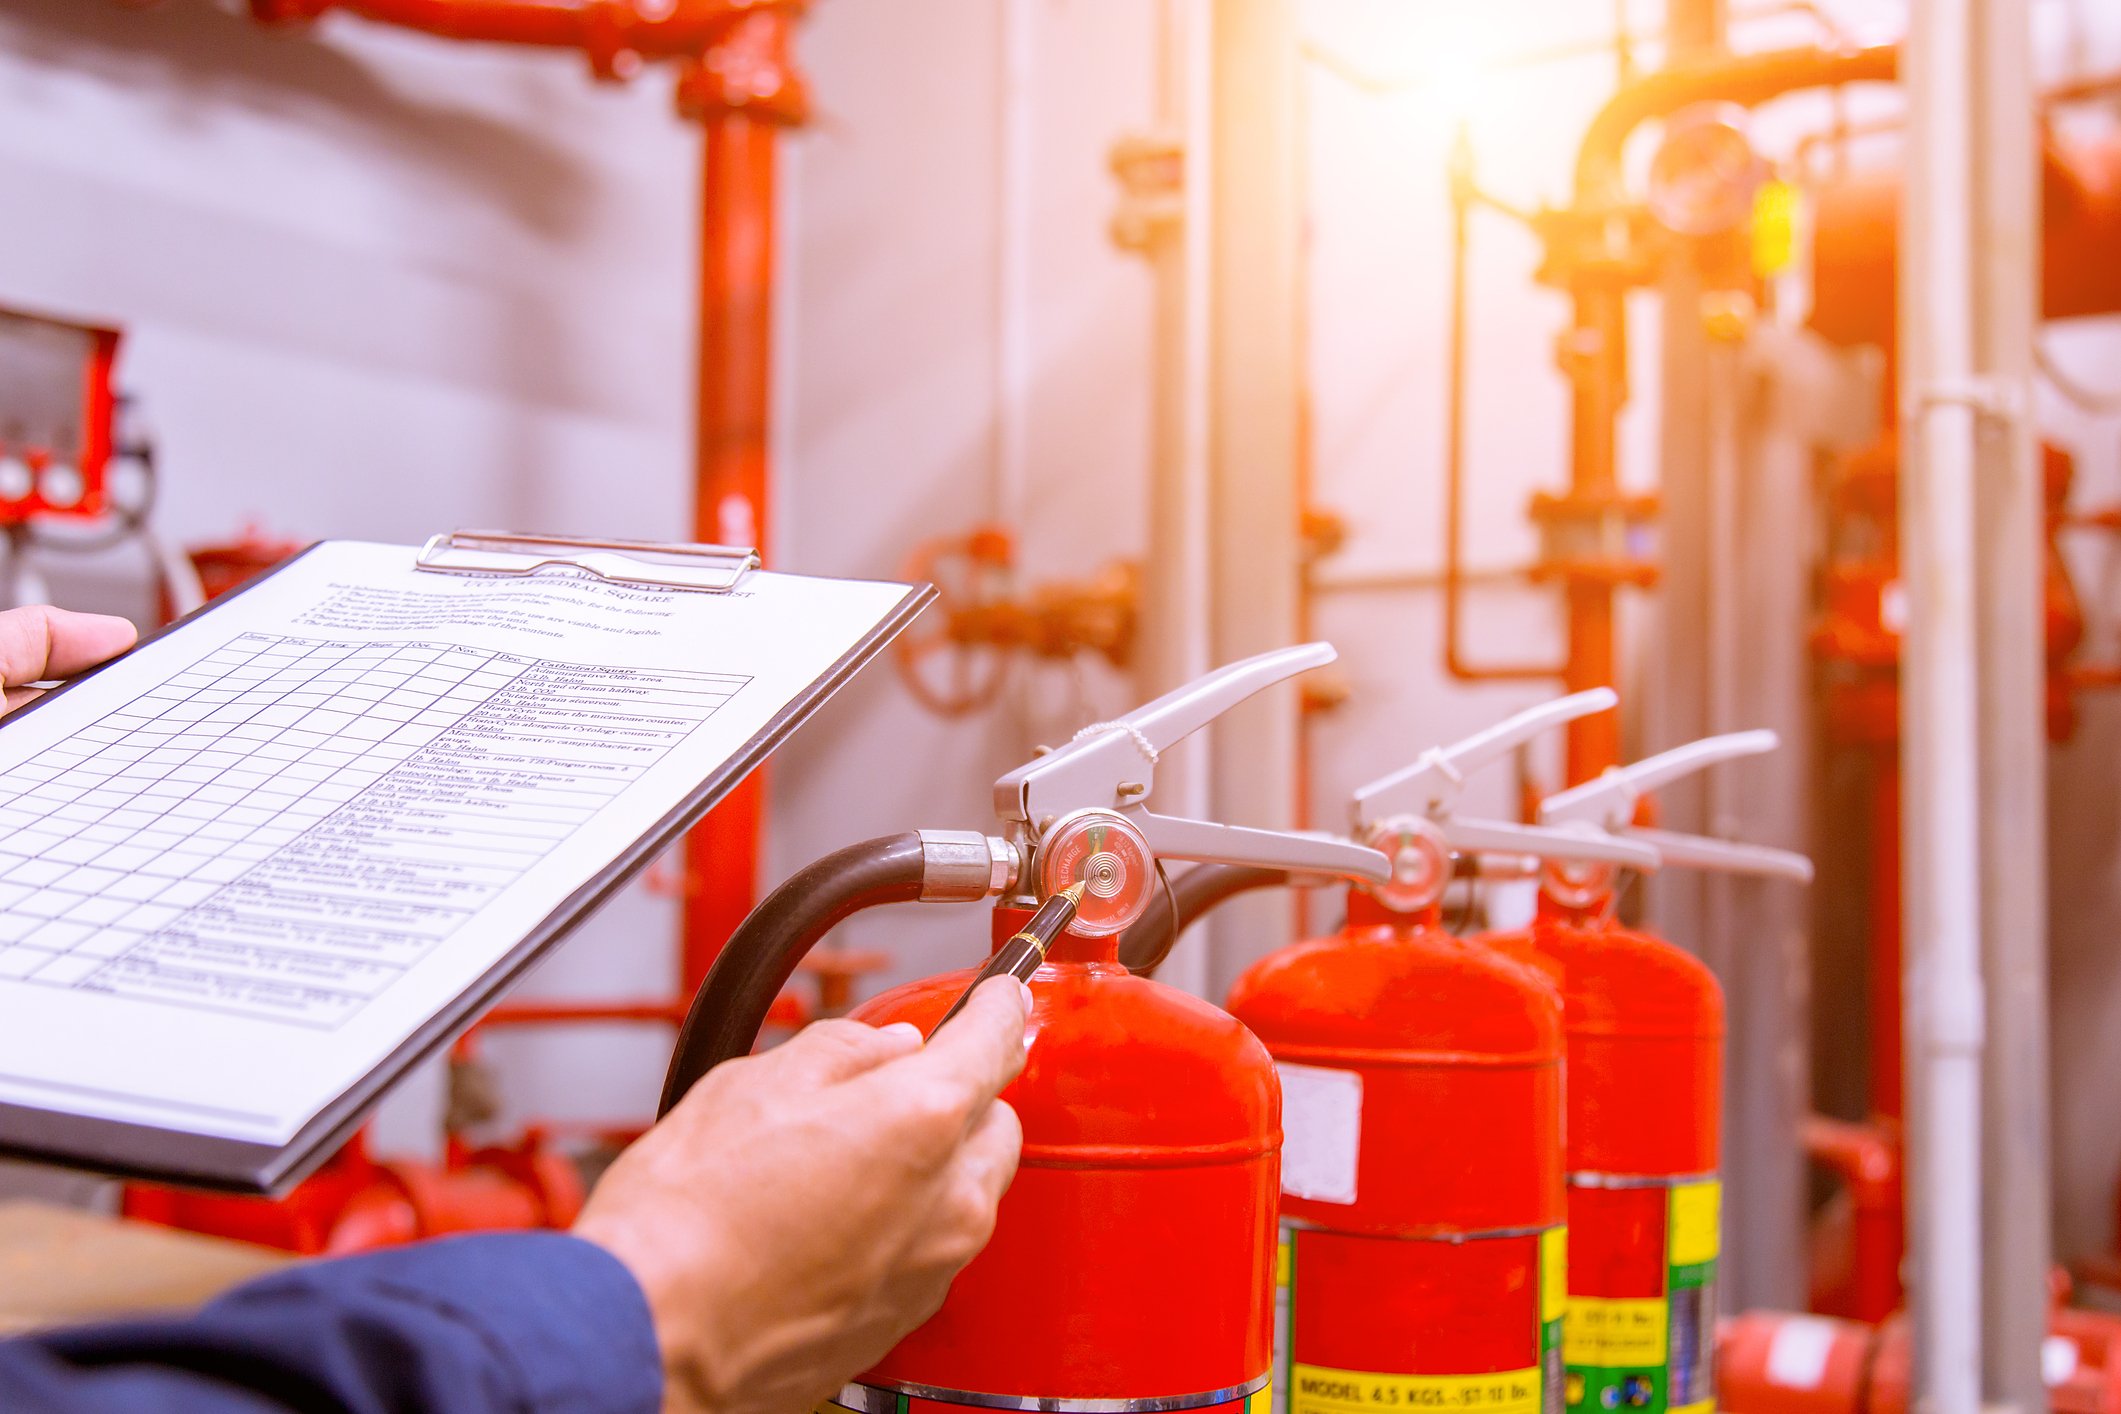 How Often Should Fire Extinguishers Be Inspected?